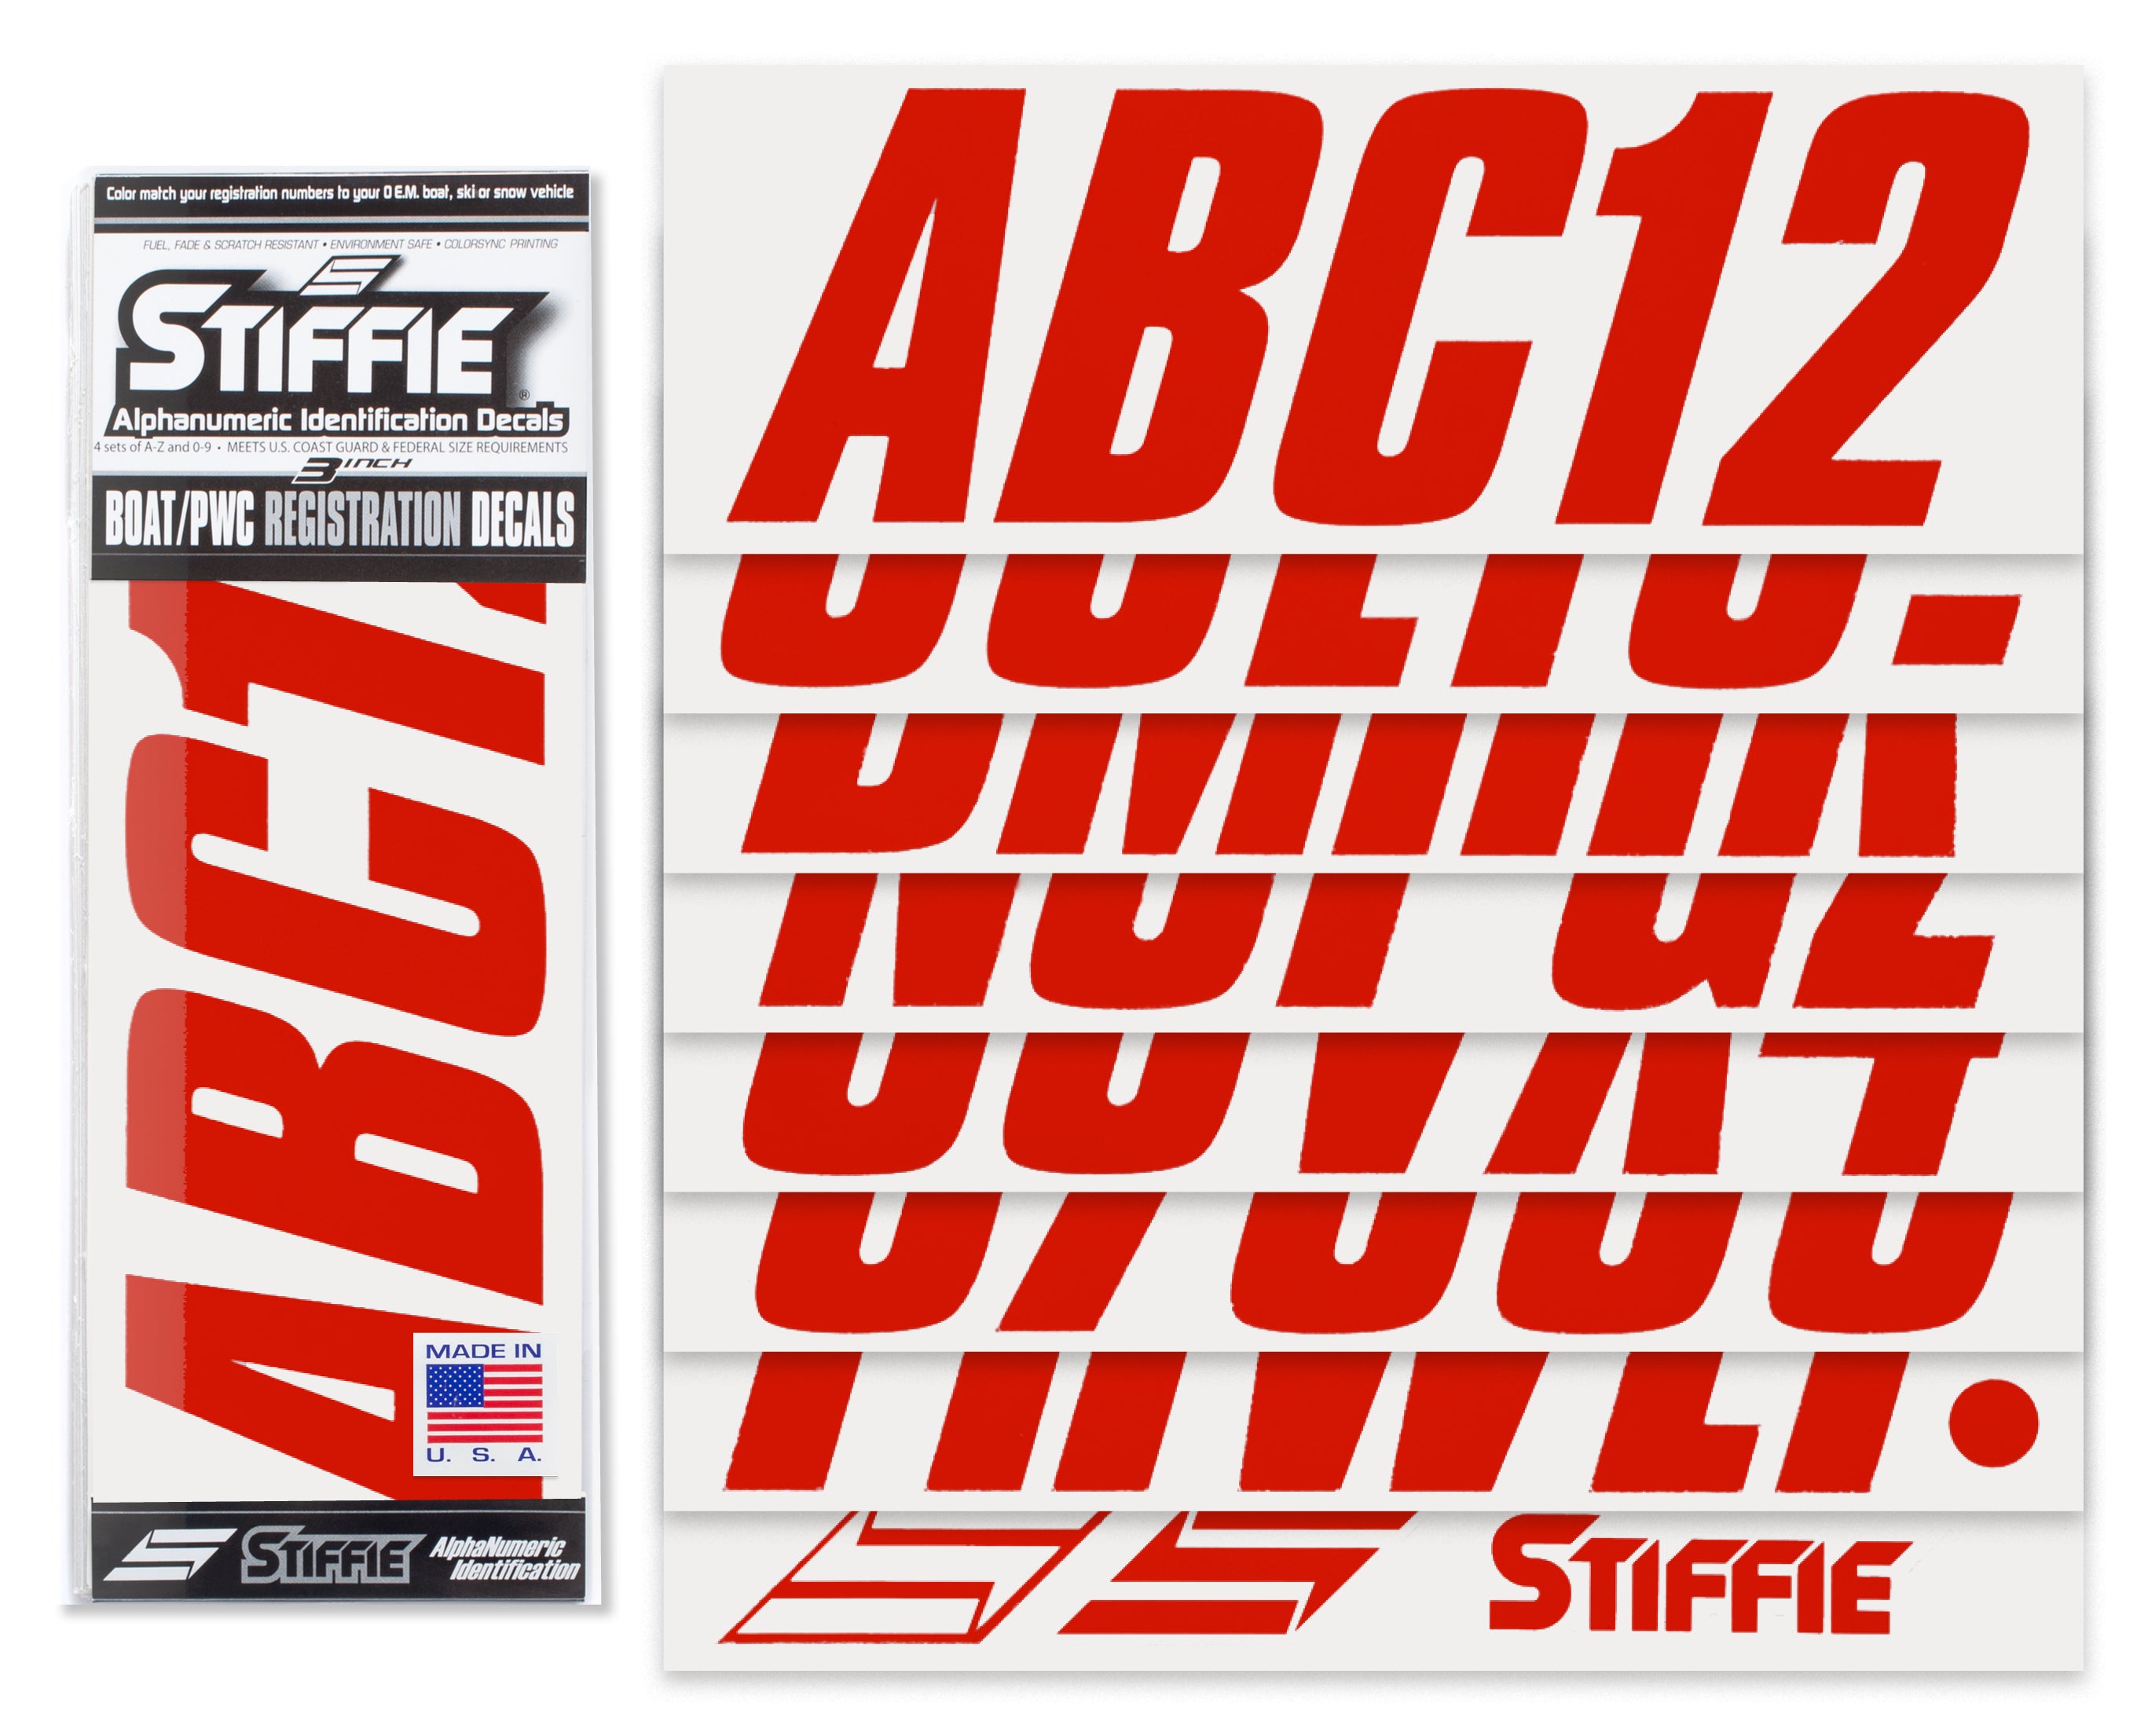 STIFFIE Shift Red 3" ID Kit Alpha-Numeric Registration Identification Numbers Stickers Decals for Boats & Personal Watercraft